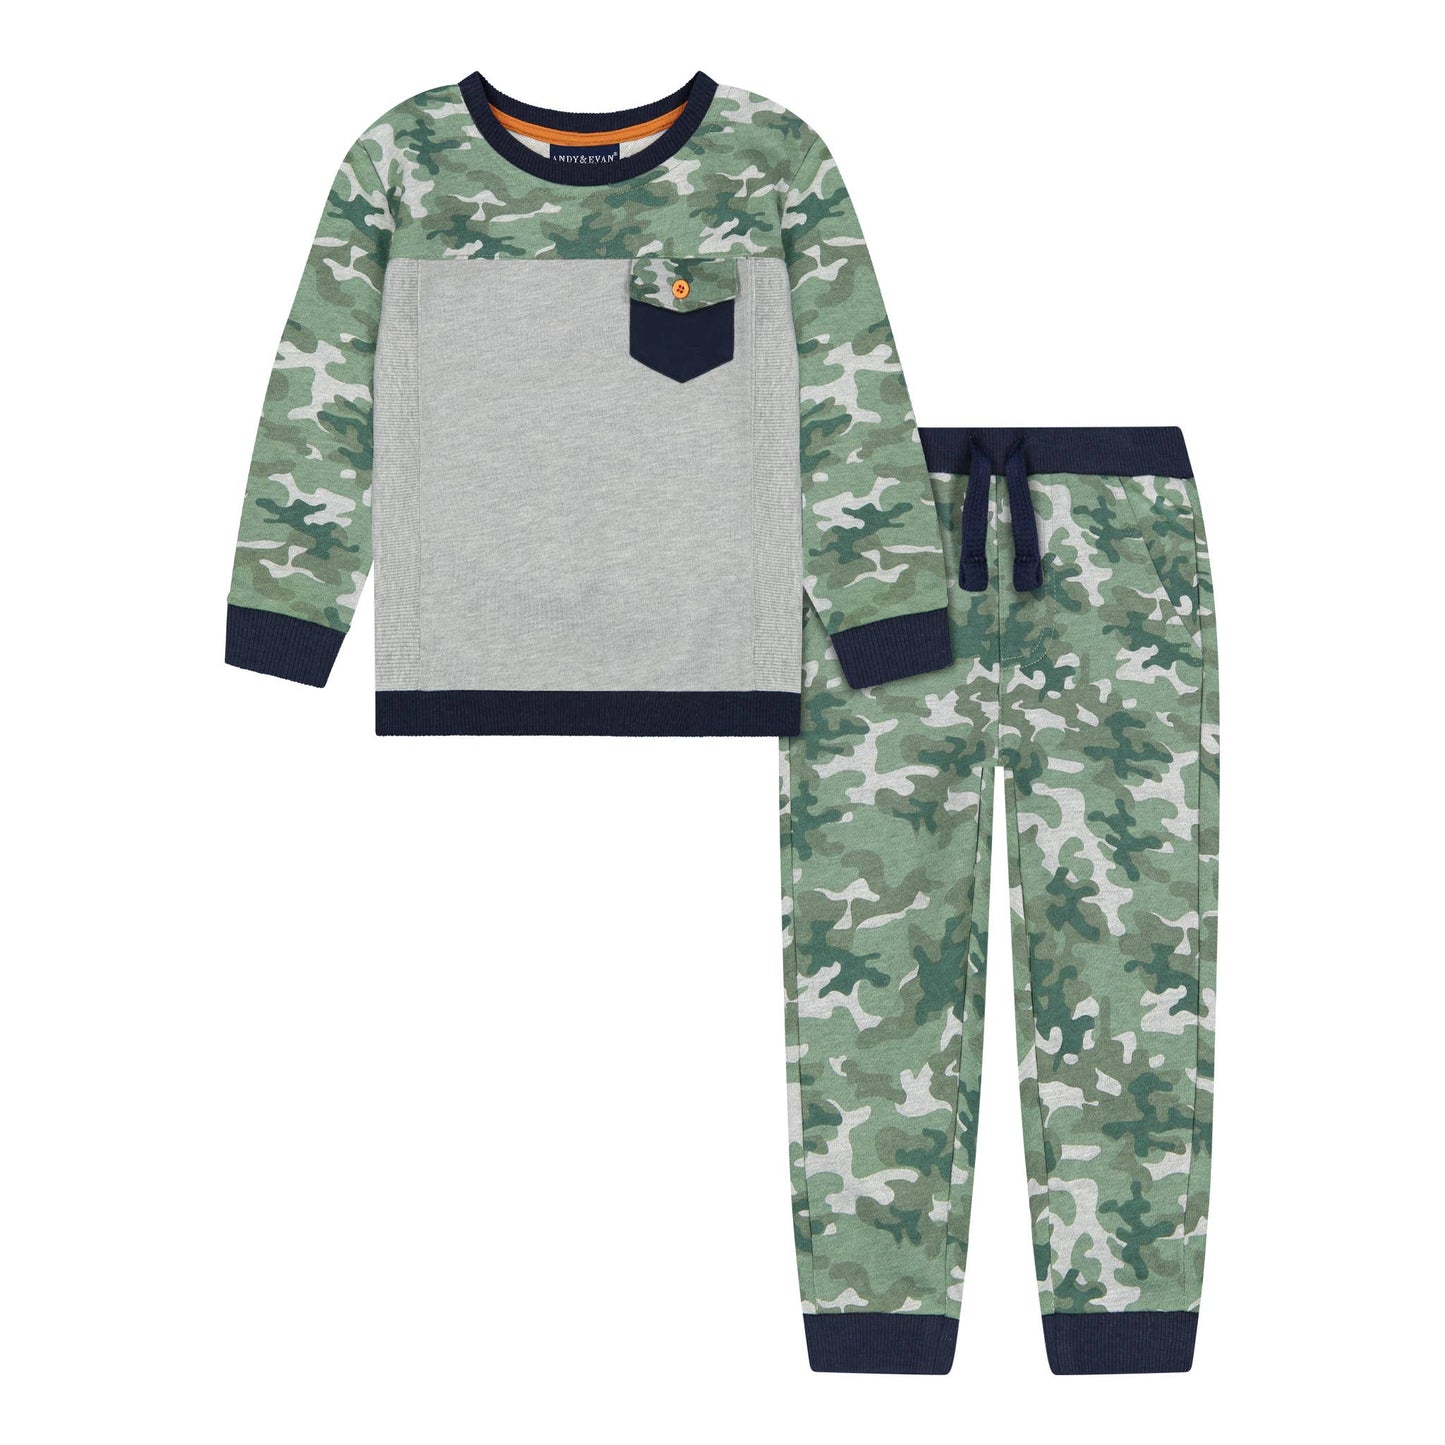 French Terry Set - Camo